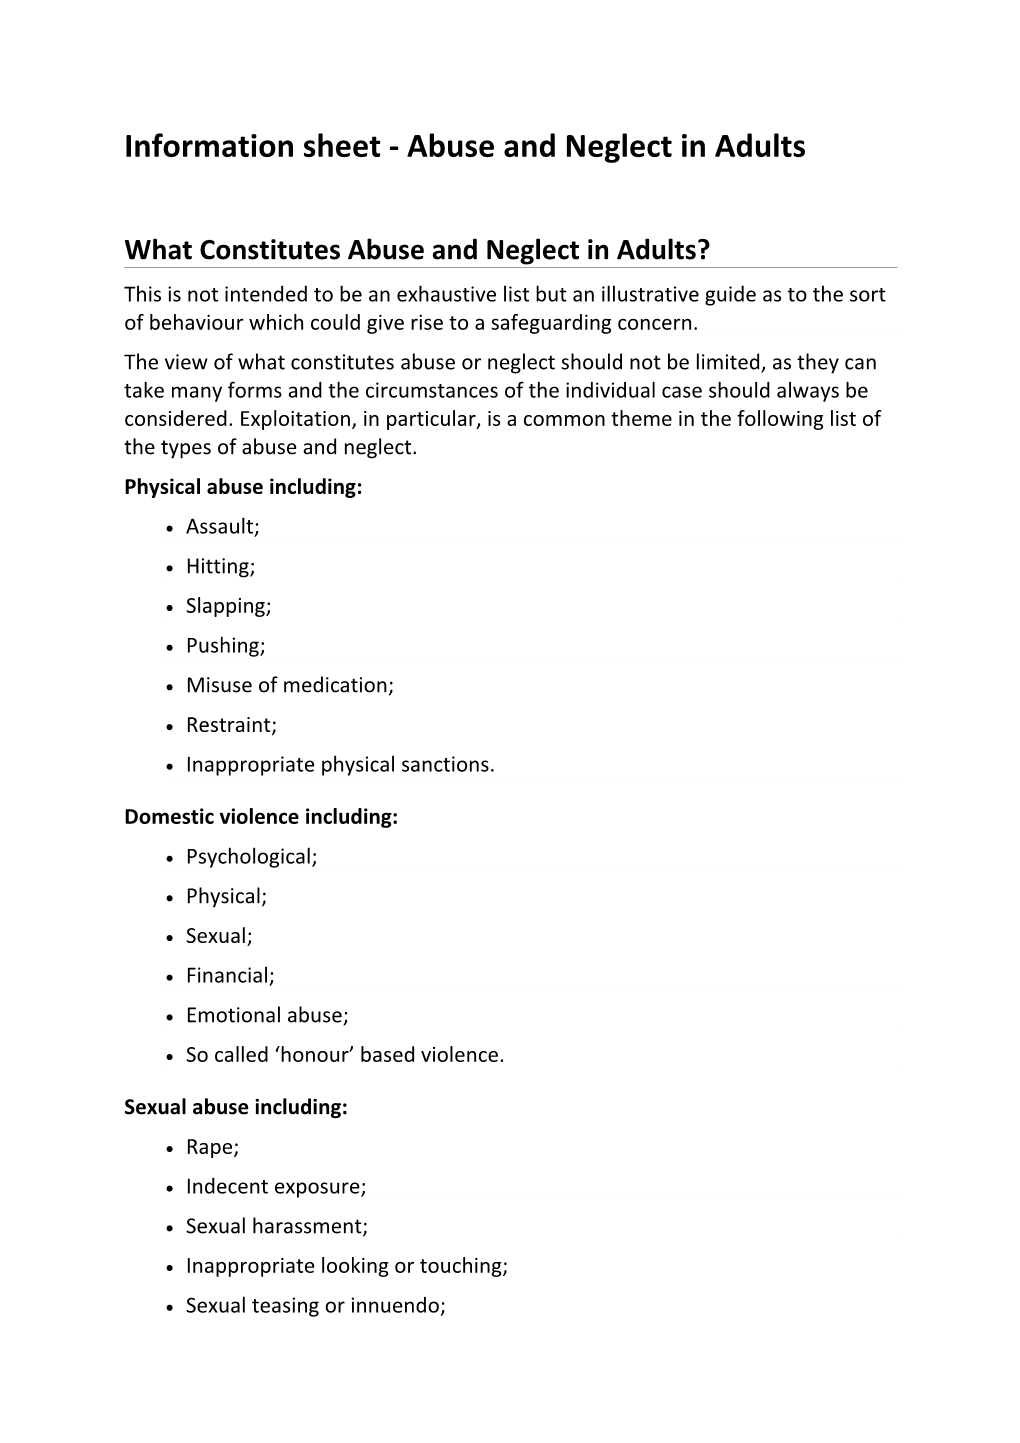 Information Sheet - Abuse and Neglect in Adults